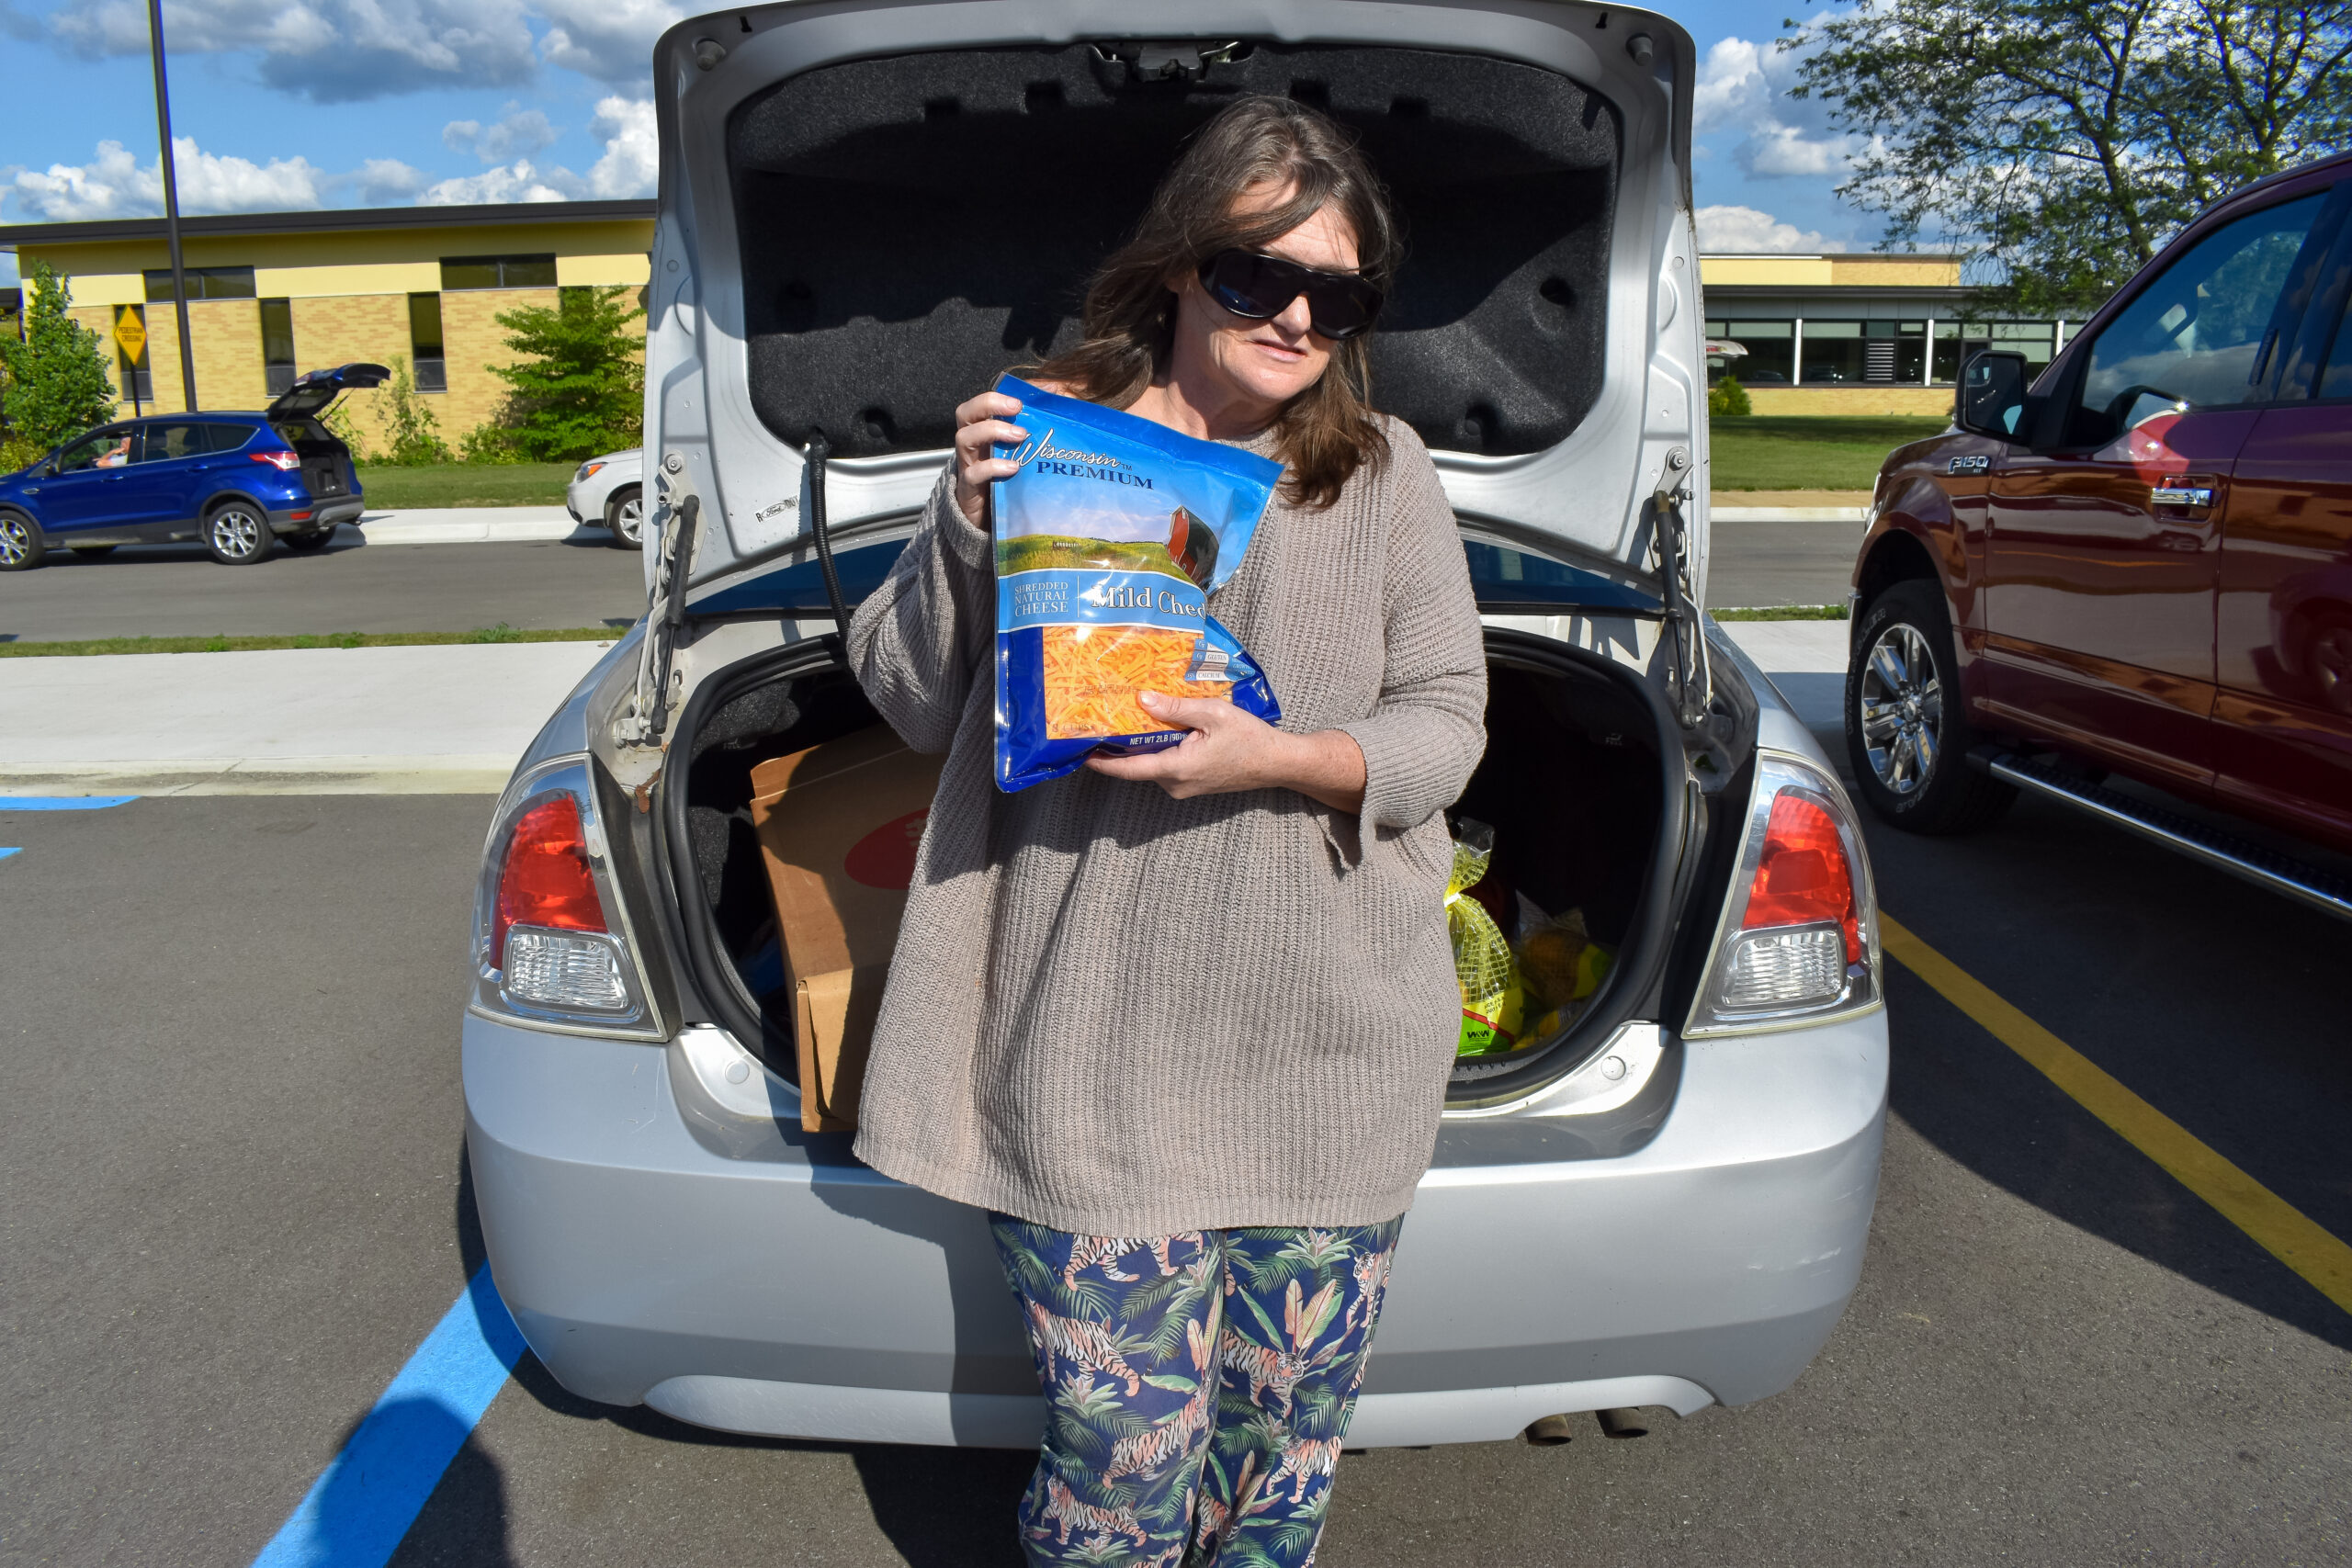 A woman poses with cheese and other food she received from the Mobile Pantry